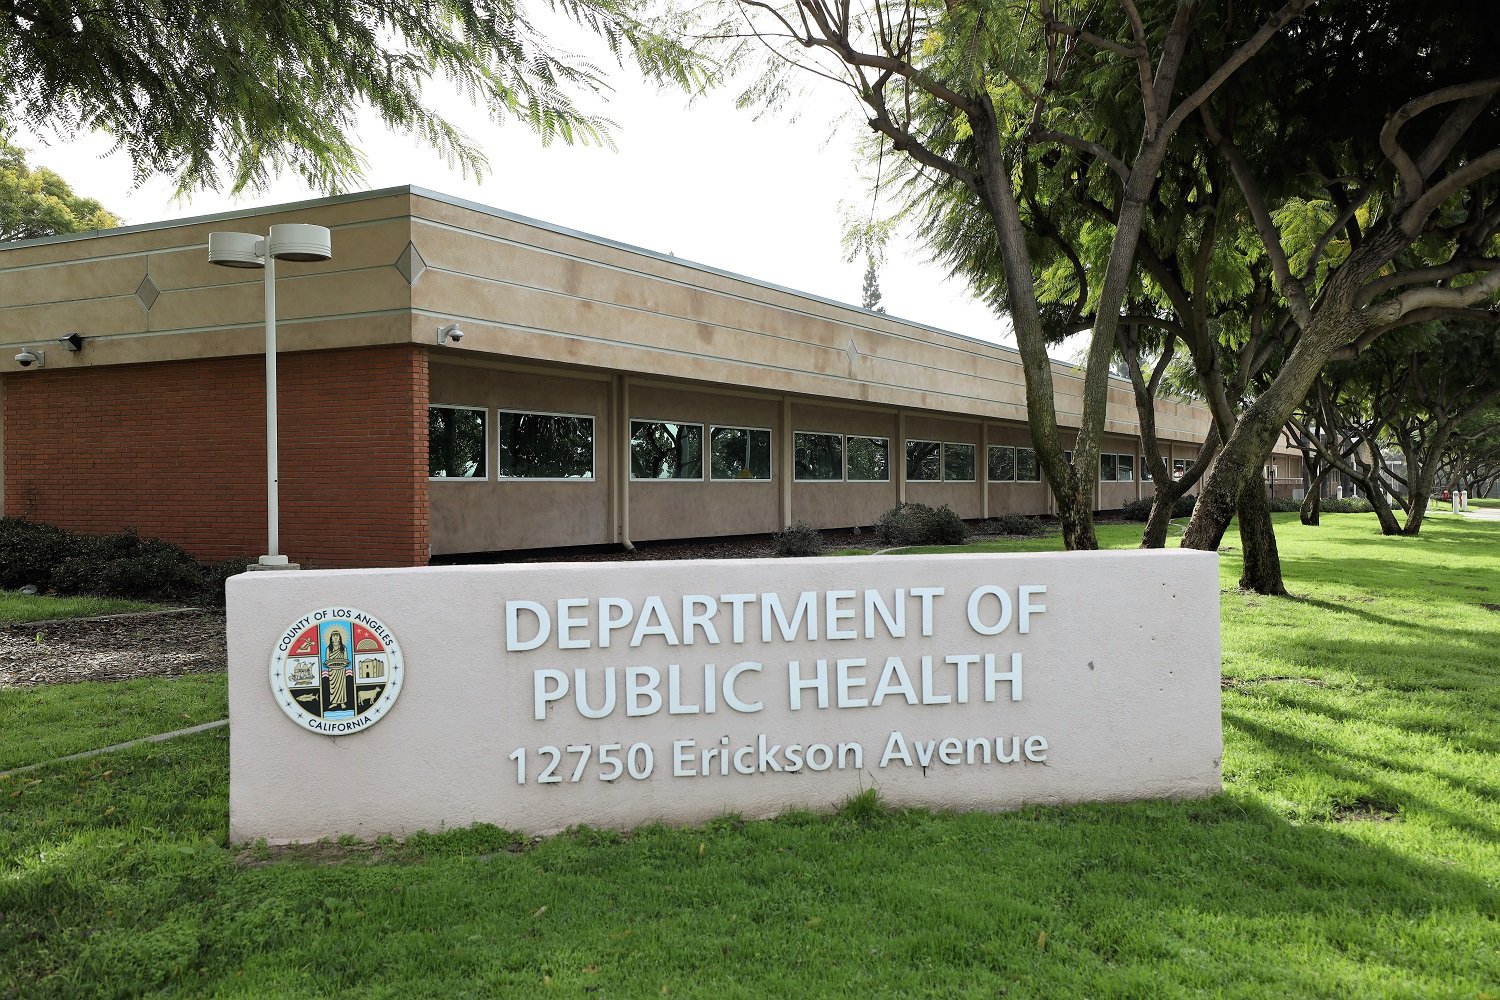 Board of Supervisors Approves $33 Million Downey Laboratory Expansion and Renovation Project